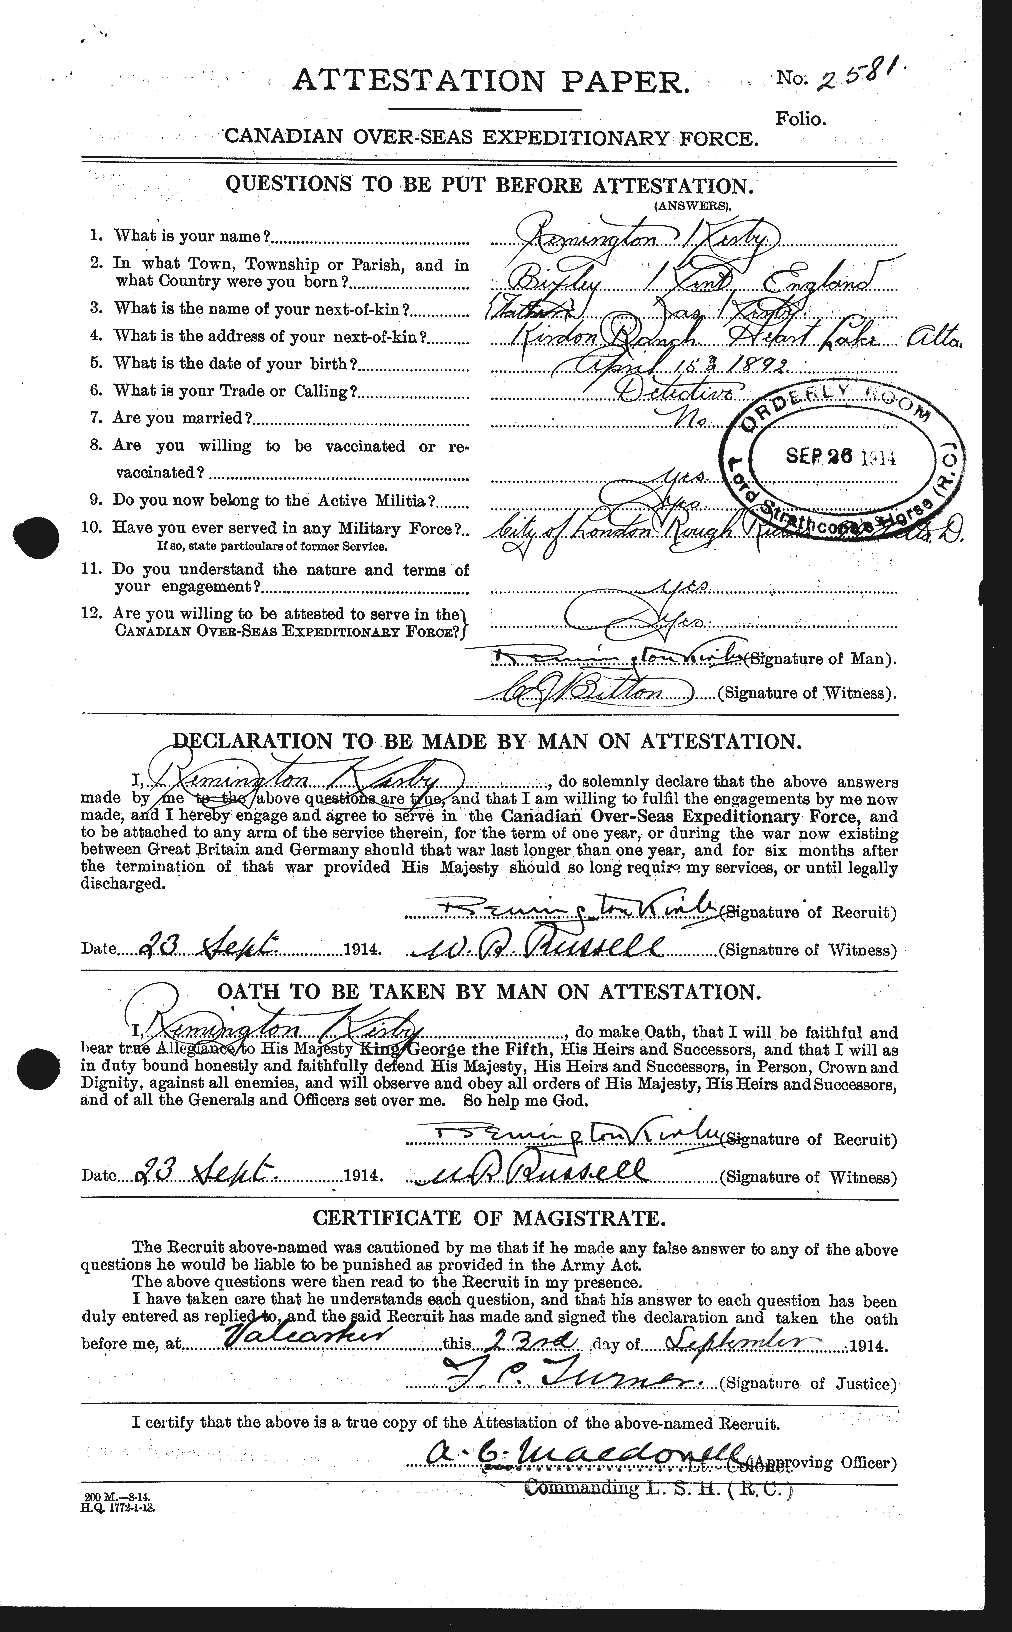 Personnel Records of the First World War - CEF 437264a